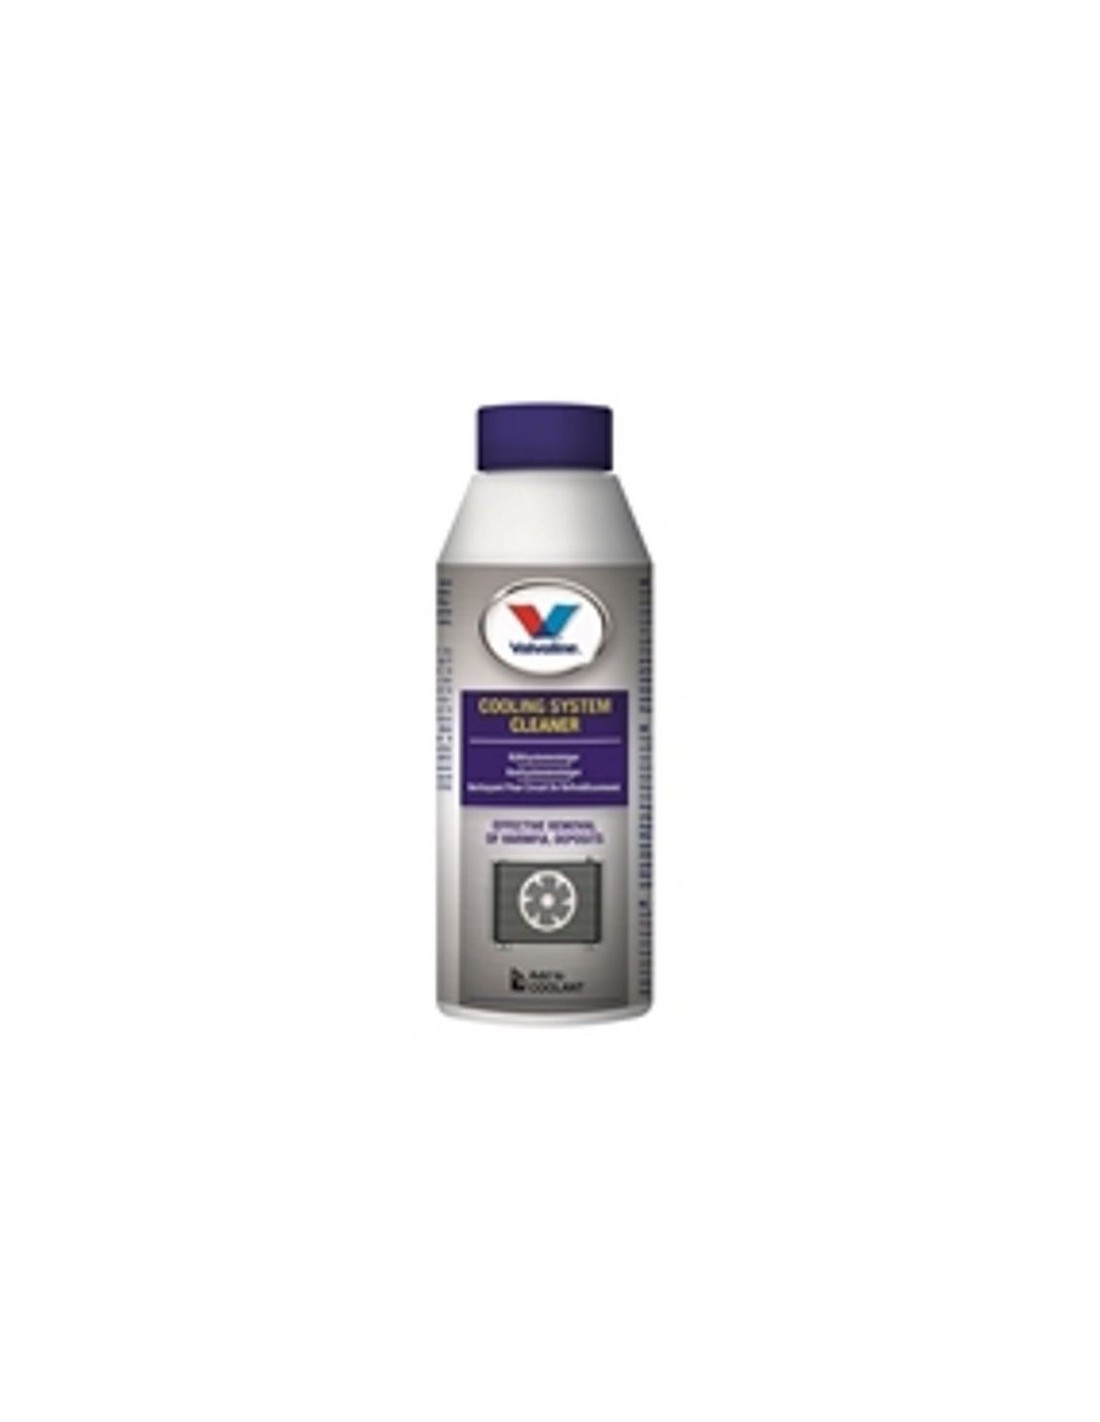 Cooling System Cleaner, Valvoline|250 ml - 7.95€-   Capacidad 250 ml